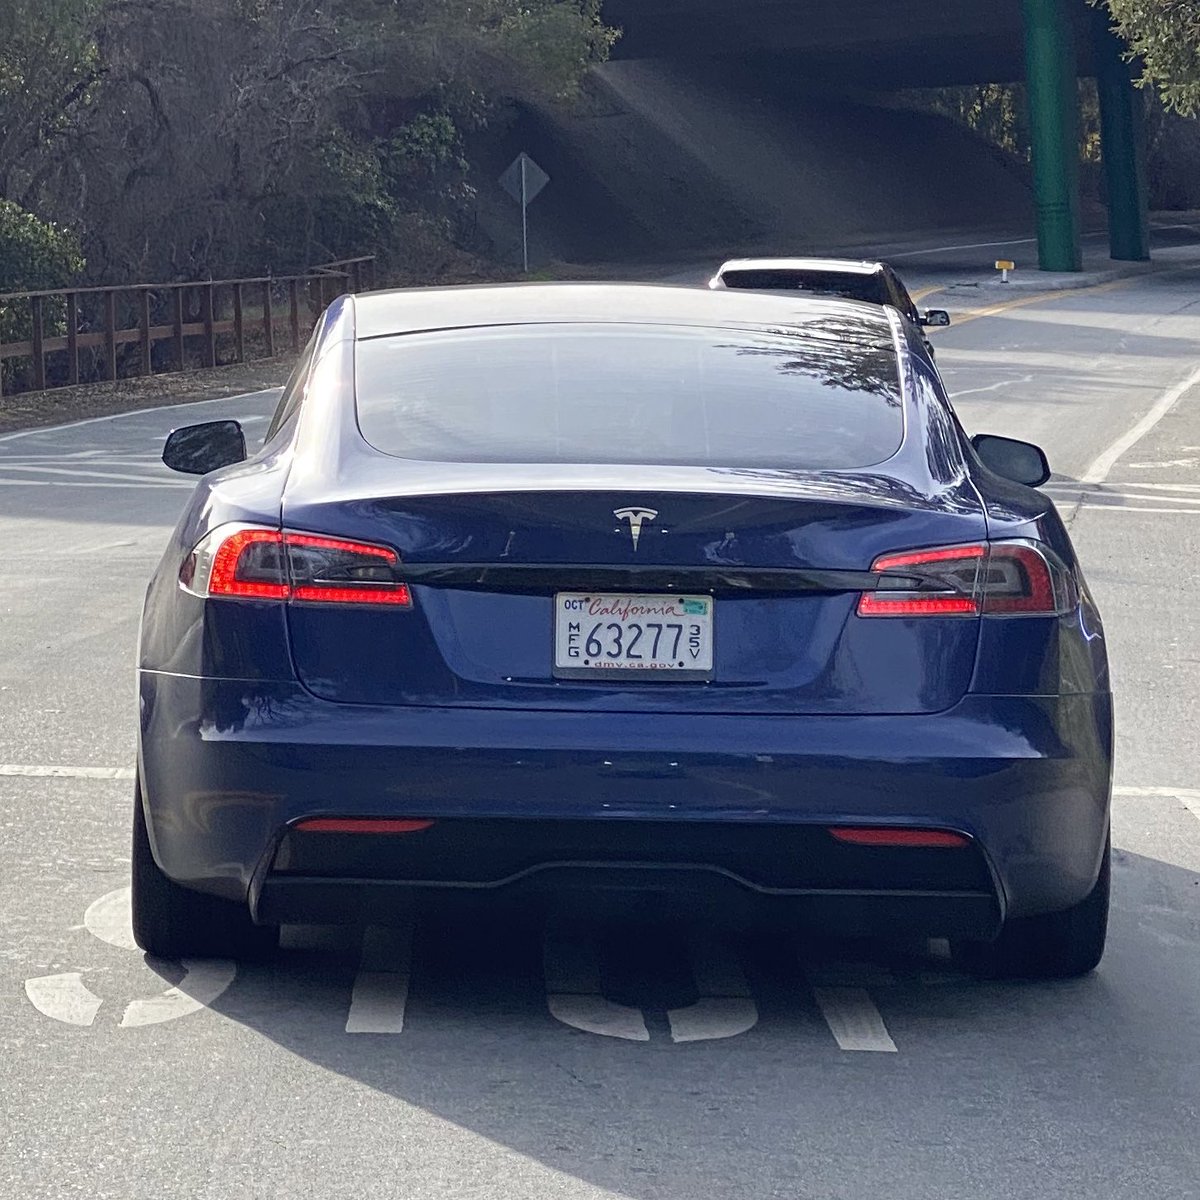 The Kilowatts On Twitter We Just Found A Model S Plaid Prototype Out Testing In Palo Alto Check Out That Wide Body And New Wheels Tesla Plaid Https T Co Ewr4e1ydqy